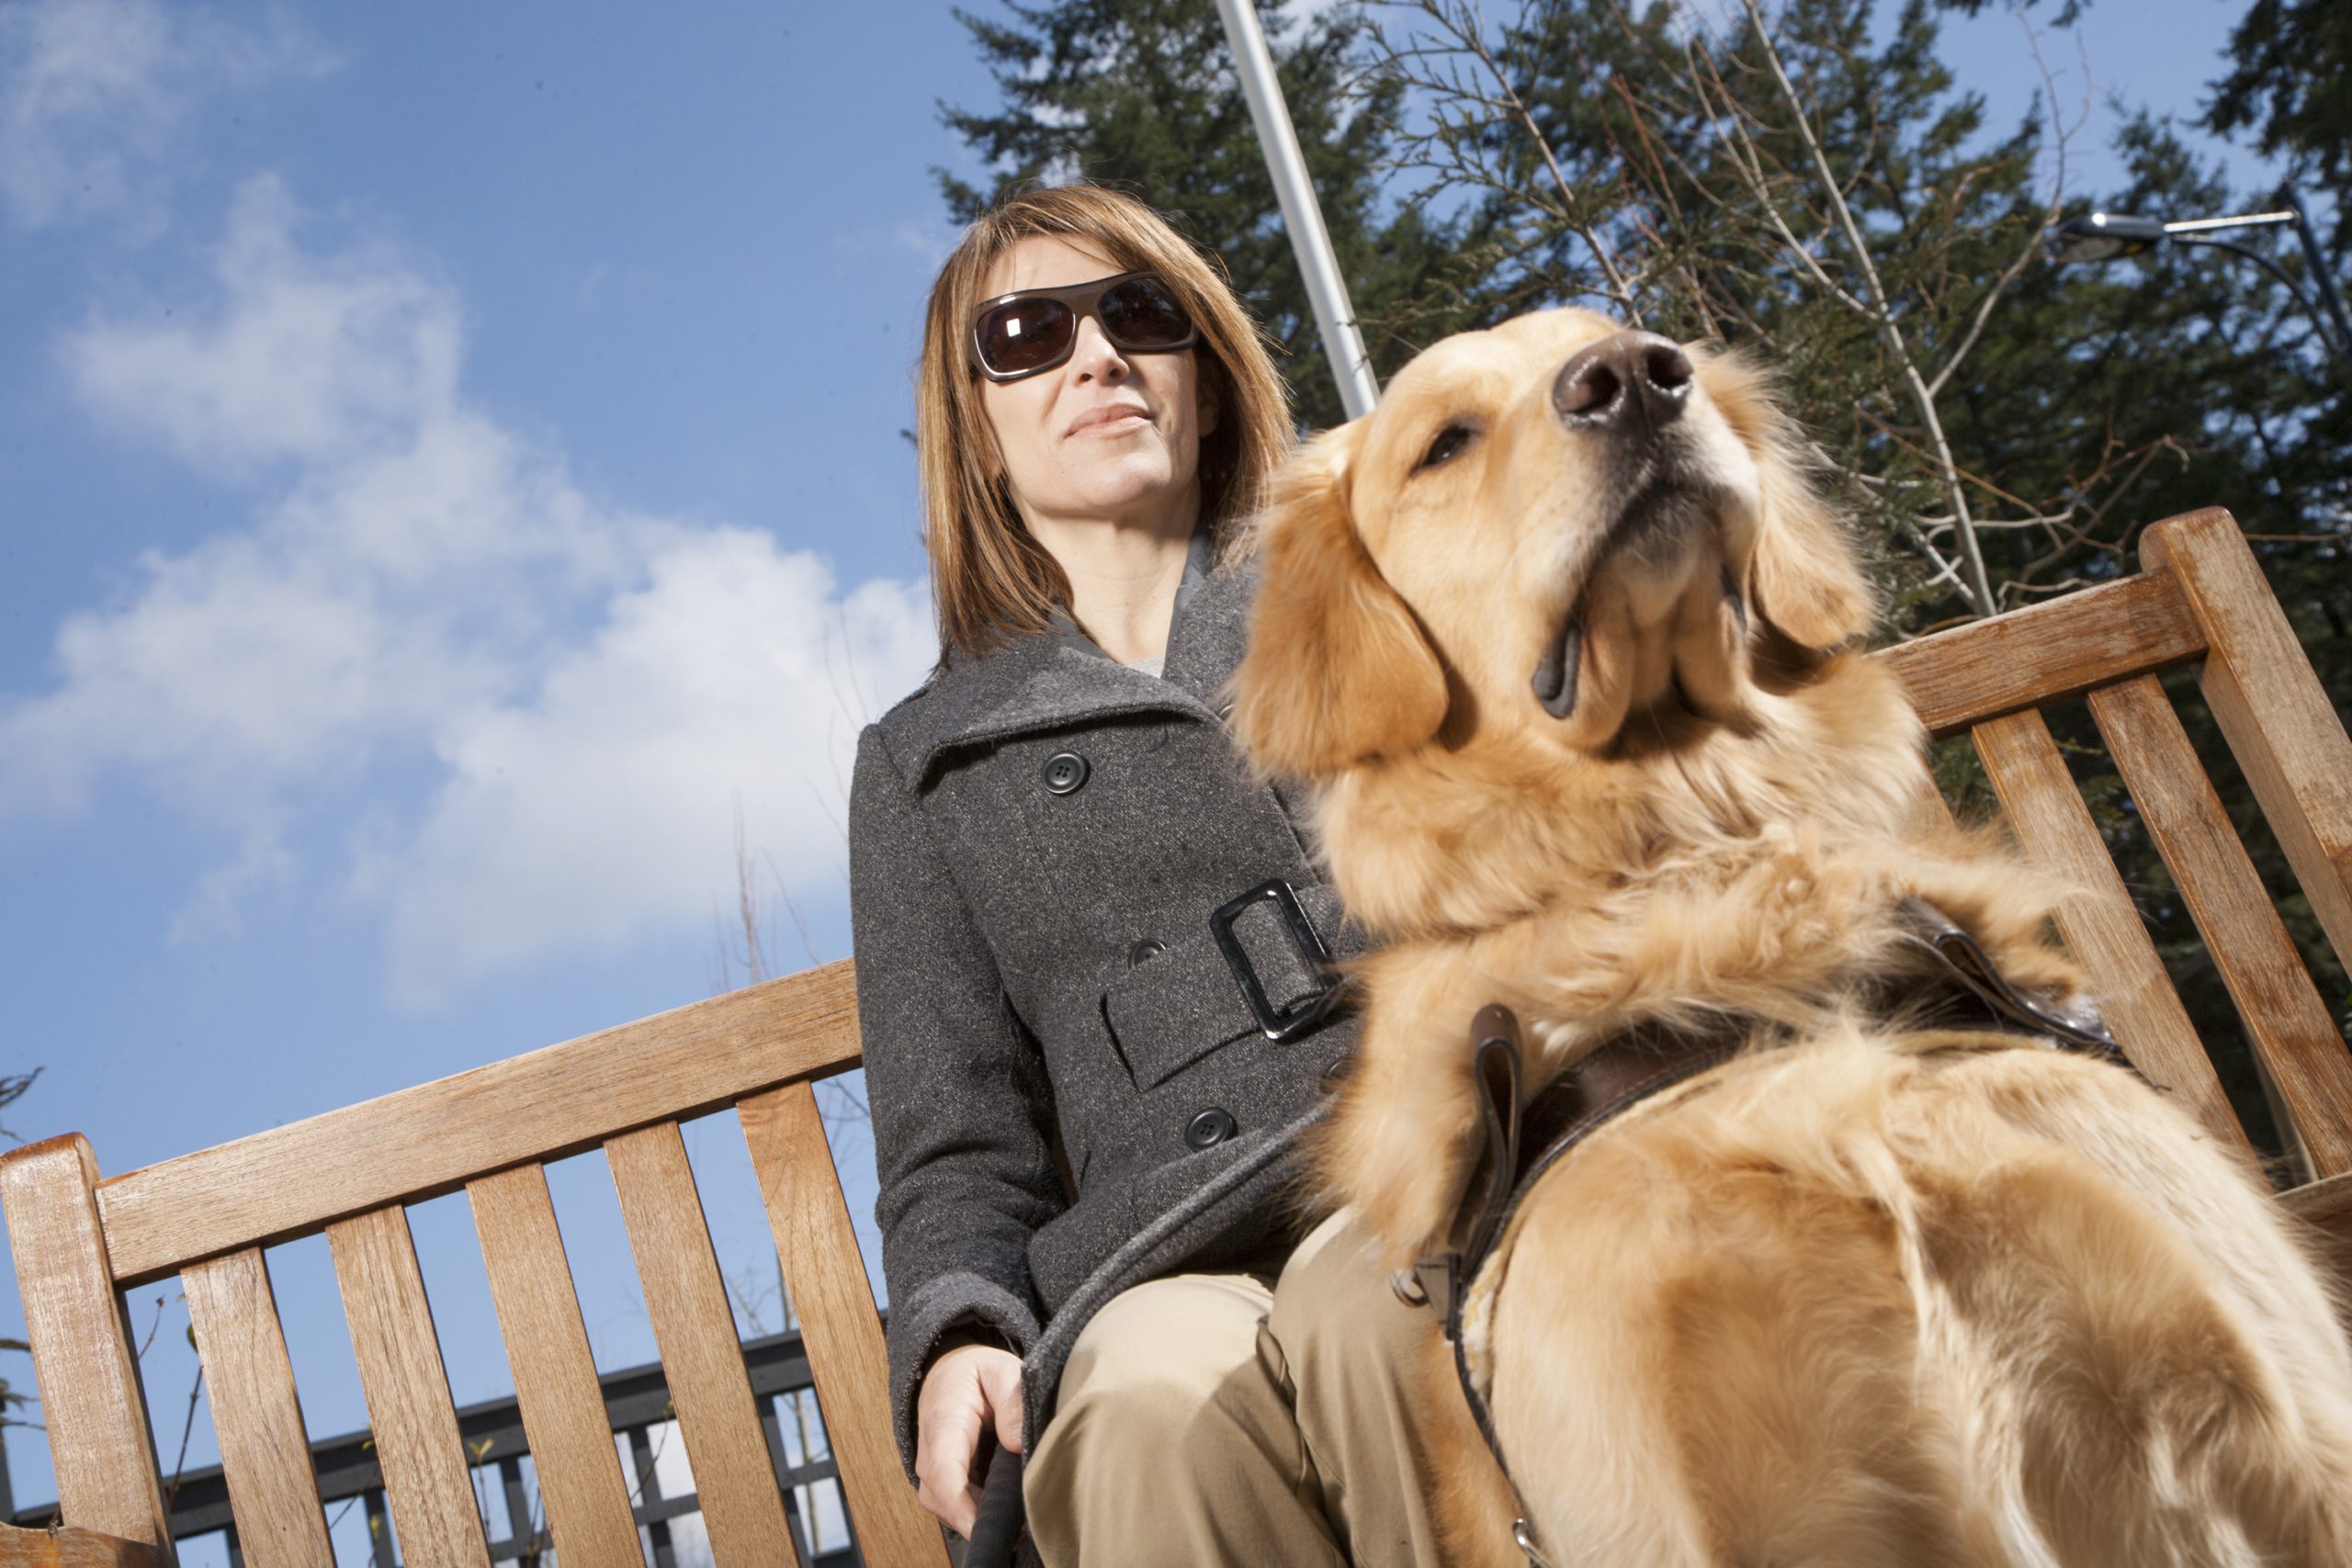 A white blind person with long hair sits with their service dog. The person wears sunglasses.